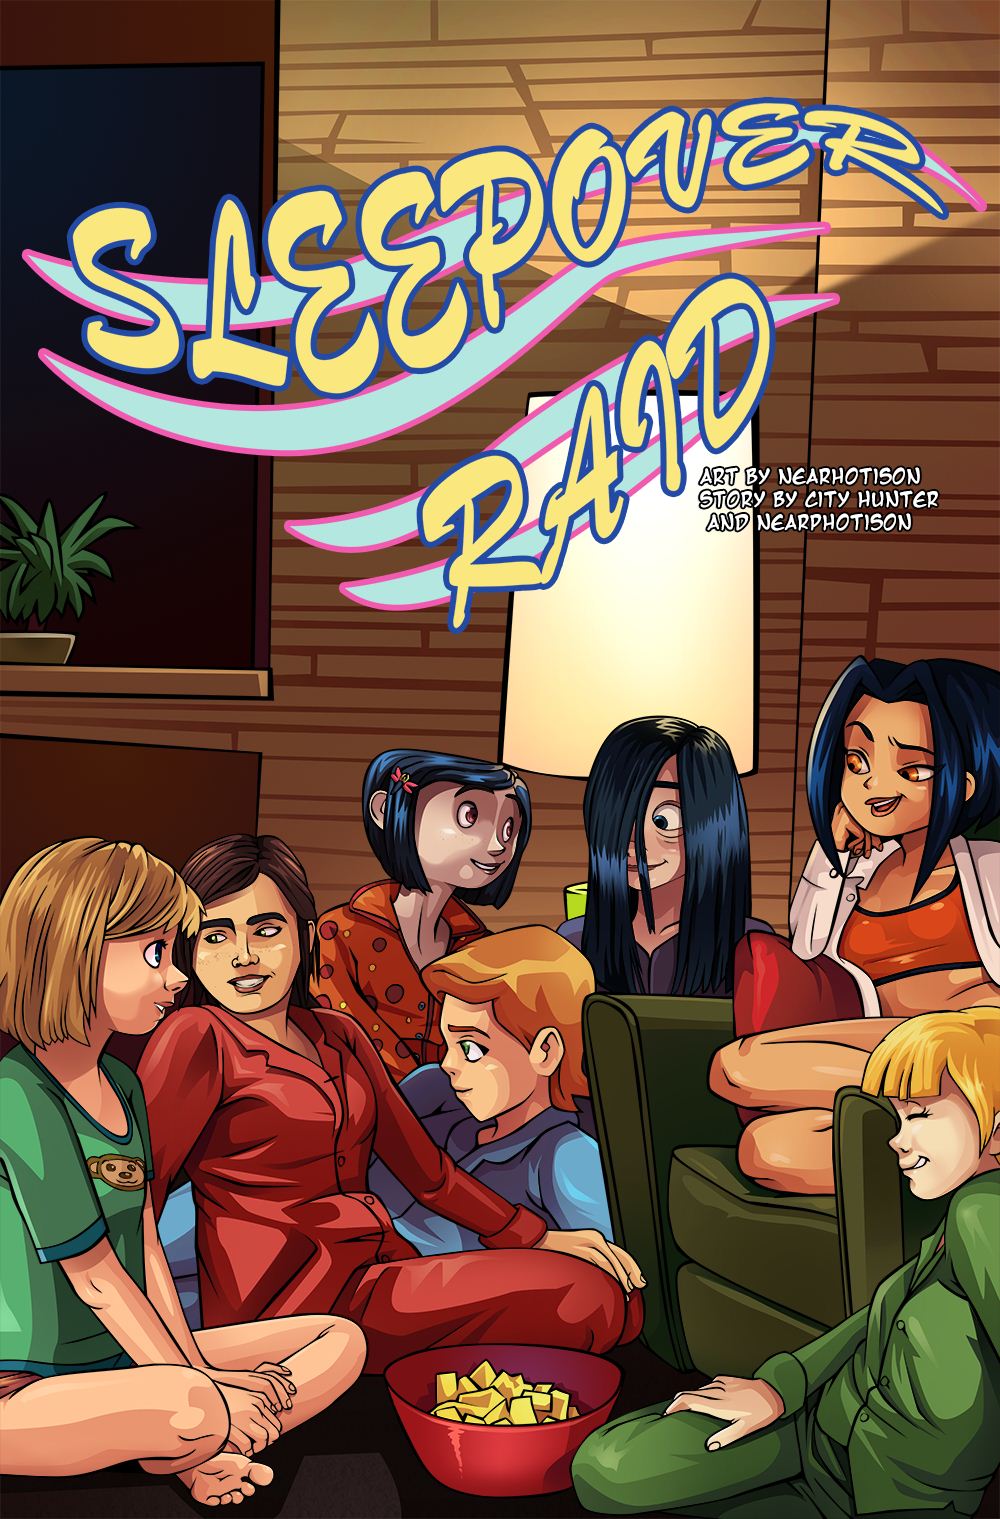 6+girls 7girls age_difference ben_10 comic coraline coraline_jones cover_page crossover ellie ellie_(the_last_of_us) feet gwen_tennyson inspector_gadget jackie_chan_adventures jade_chan more_at_source nearphotison penny_gadget sleepover sleepover_raid soles teen the_incredibles the_last_of_us toes violet_parr young younger younger_female